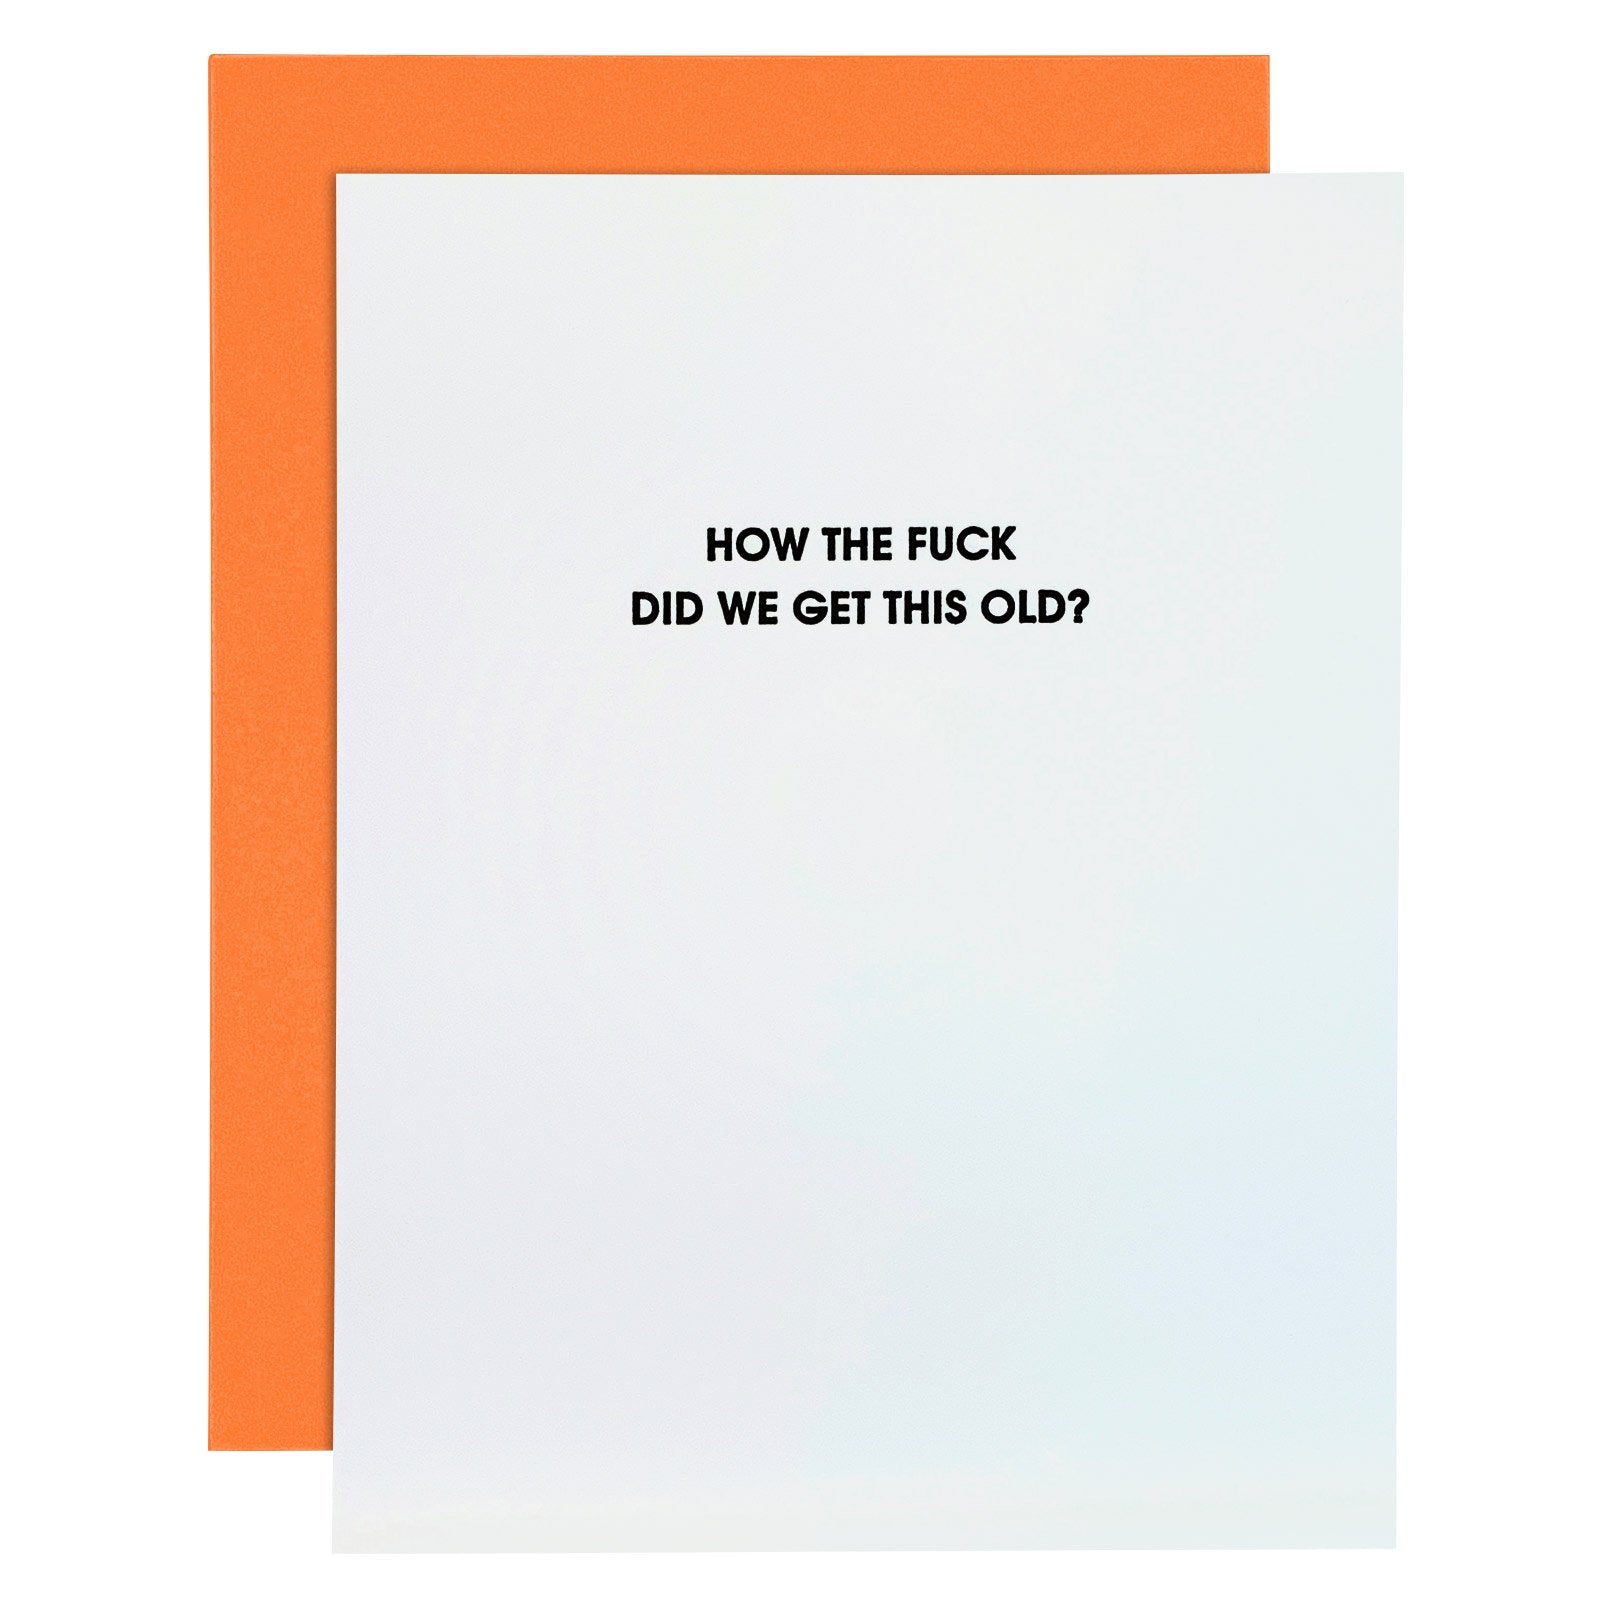 "HOW THE FUCK DID WE GET THIS OLD" FUNNY BIRTHDAY LETTERPRESS CARD